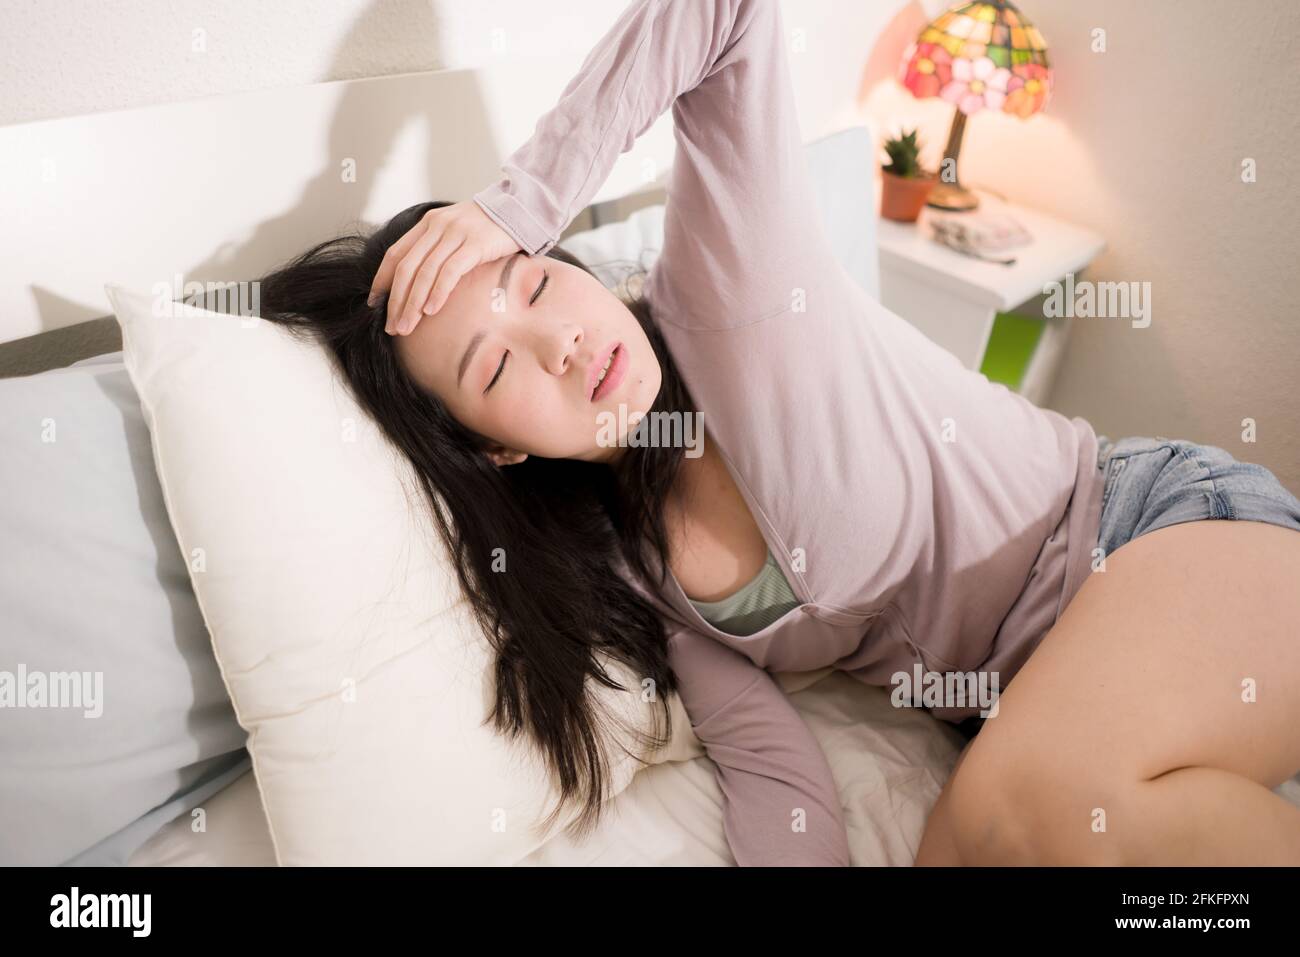 young Asian woman depressed - young beautiful and sad  Japanese girl on bed with pillow feeling unhappy and broken heart suffering depression problem Stock Photo